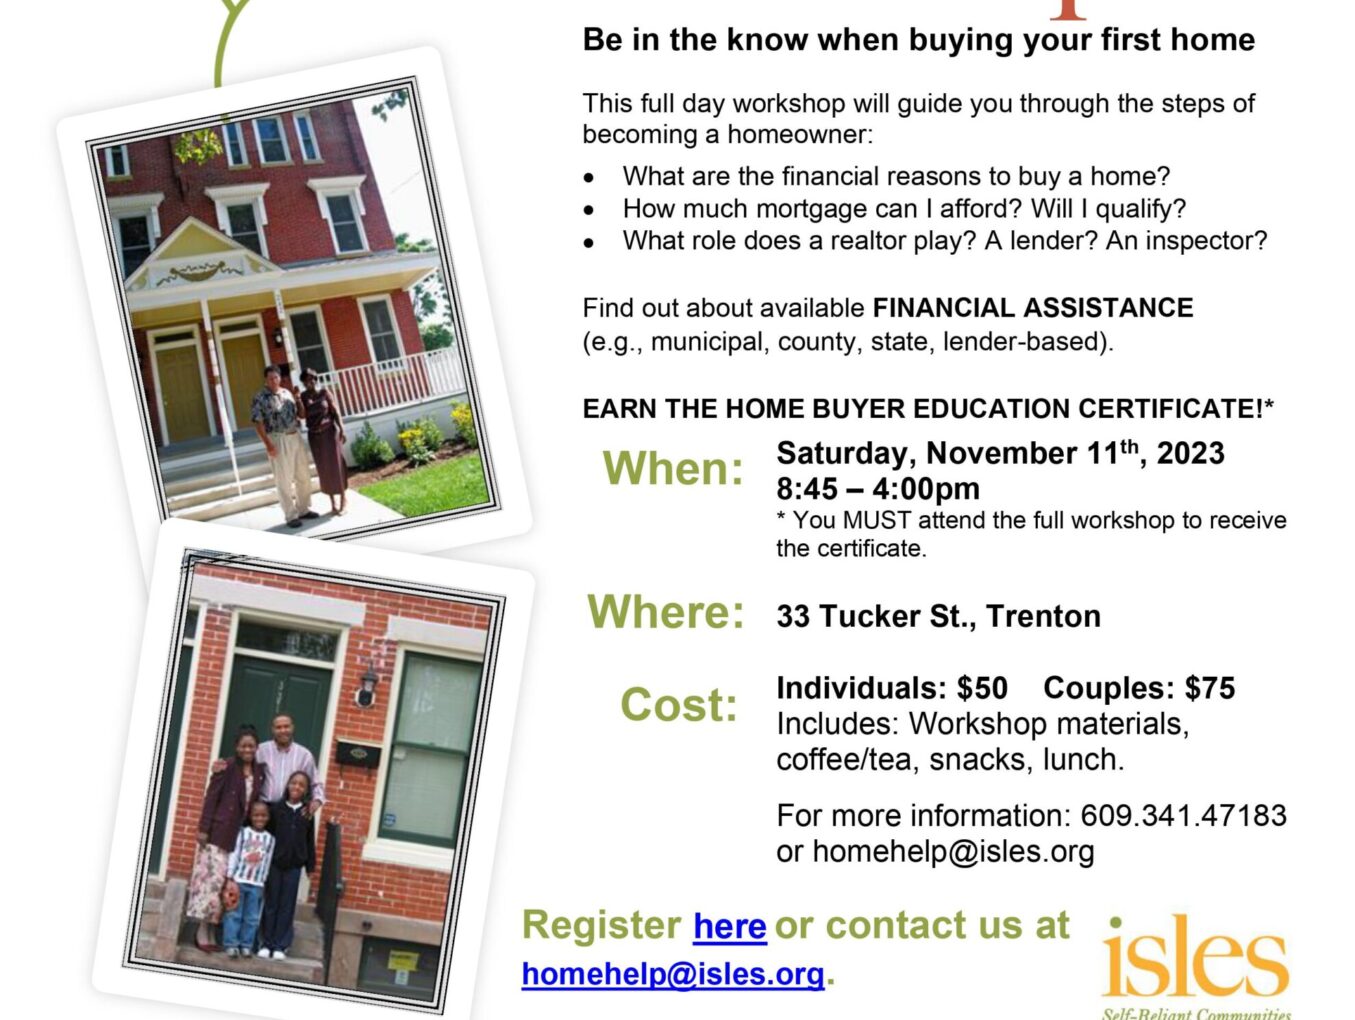 Isles to Host First Time Homebuyers Workshop